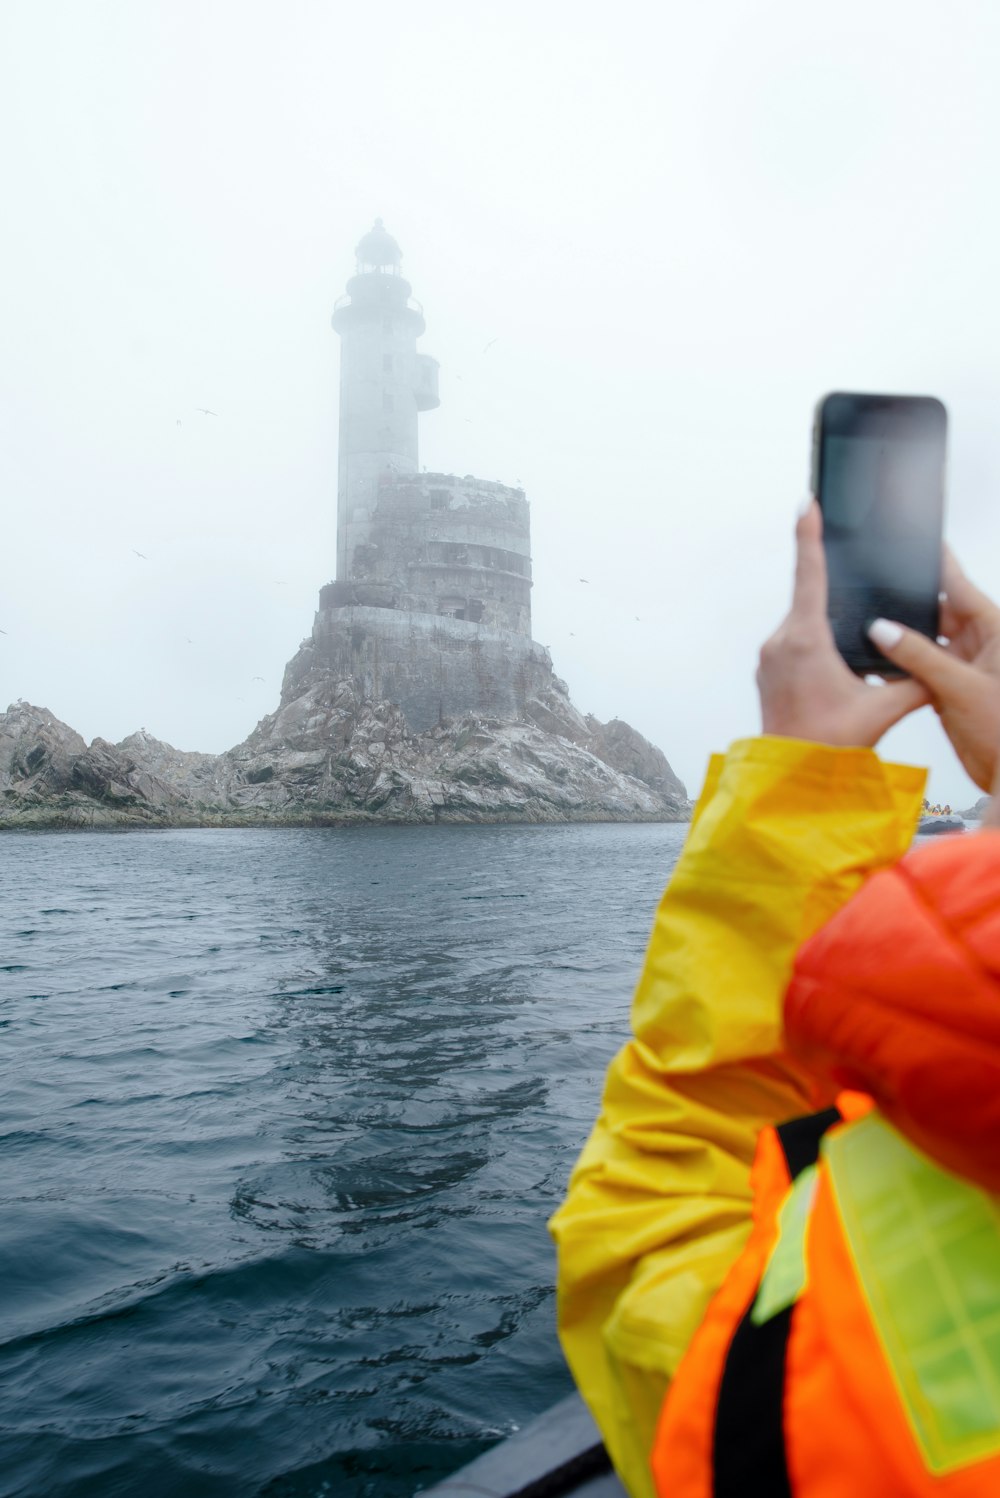 a person taking a picture of a large rock structure in the water